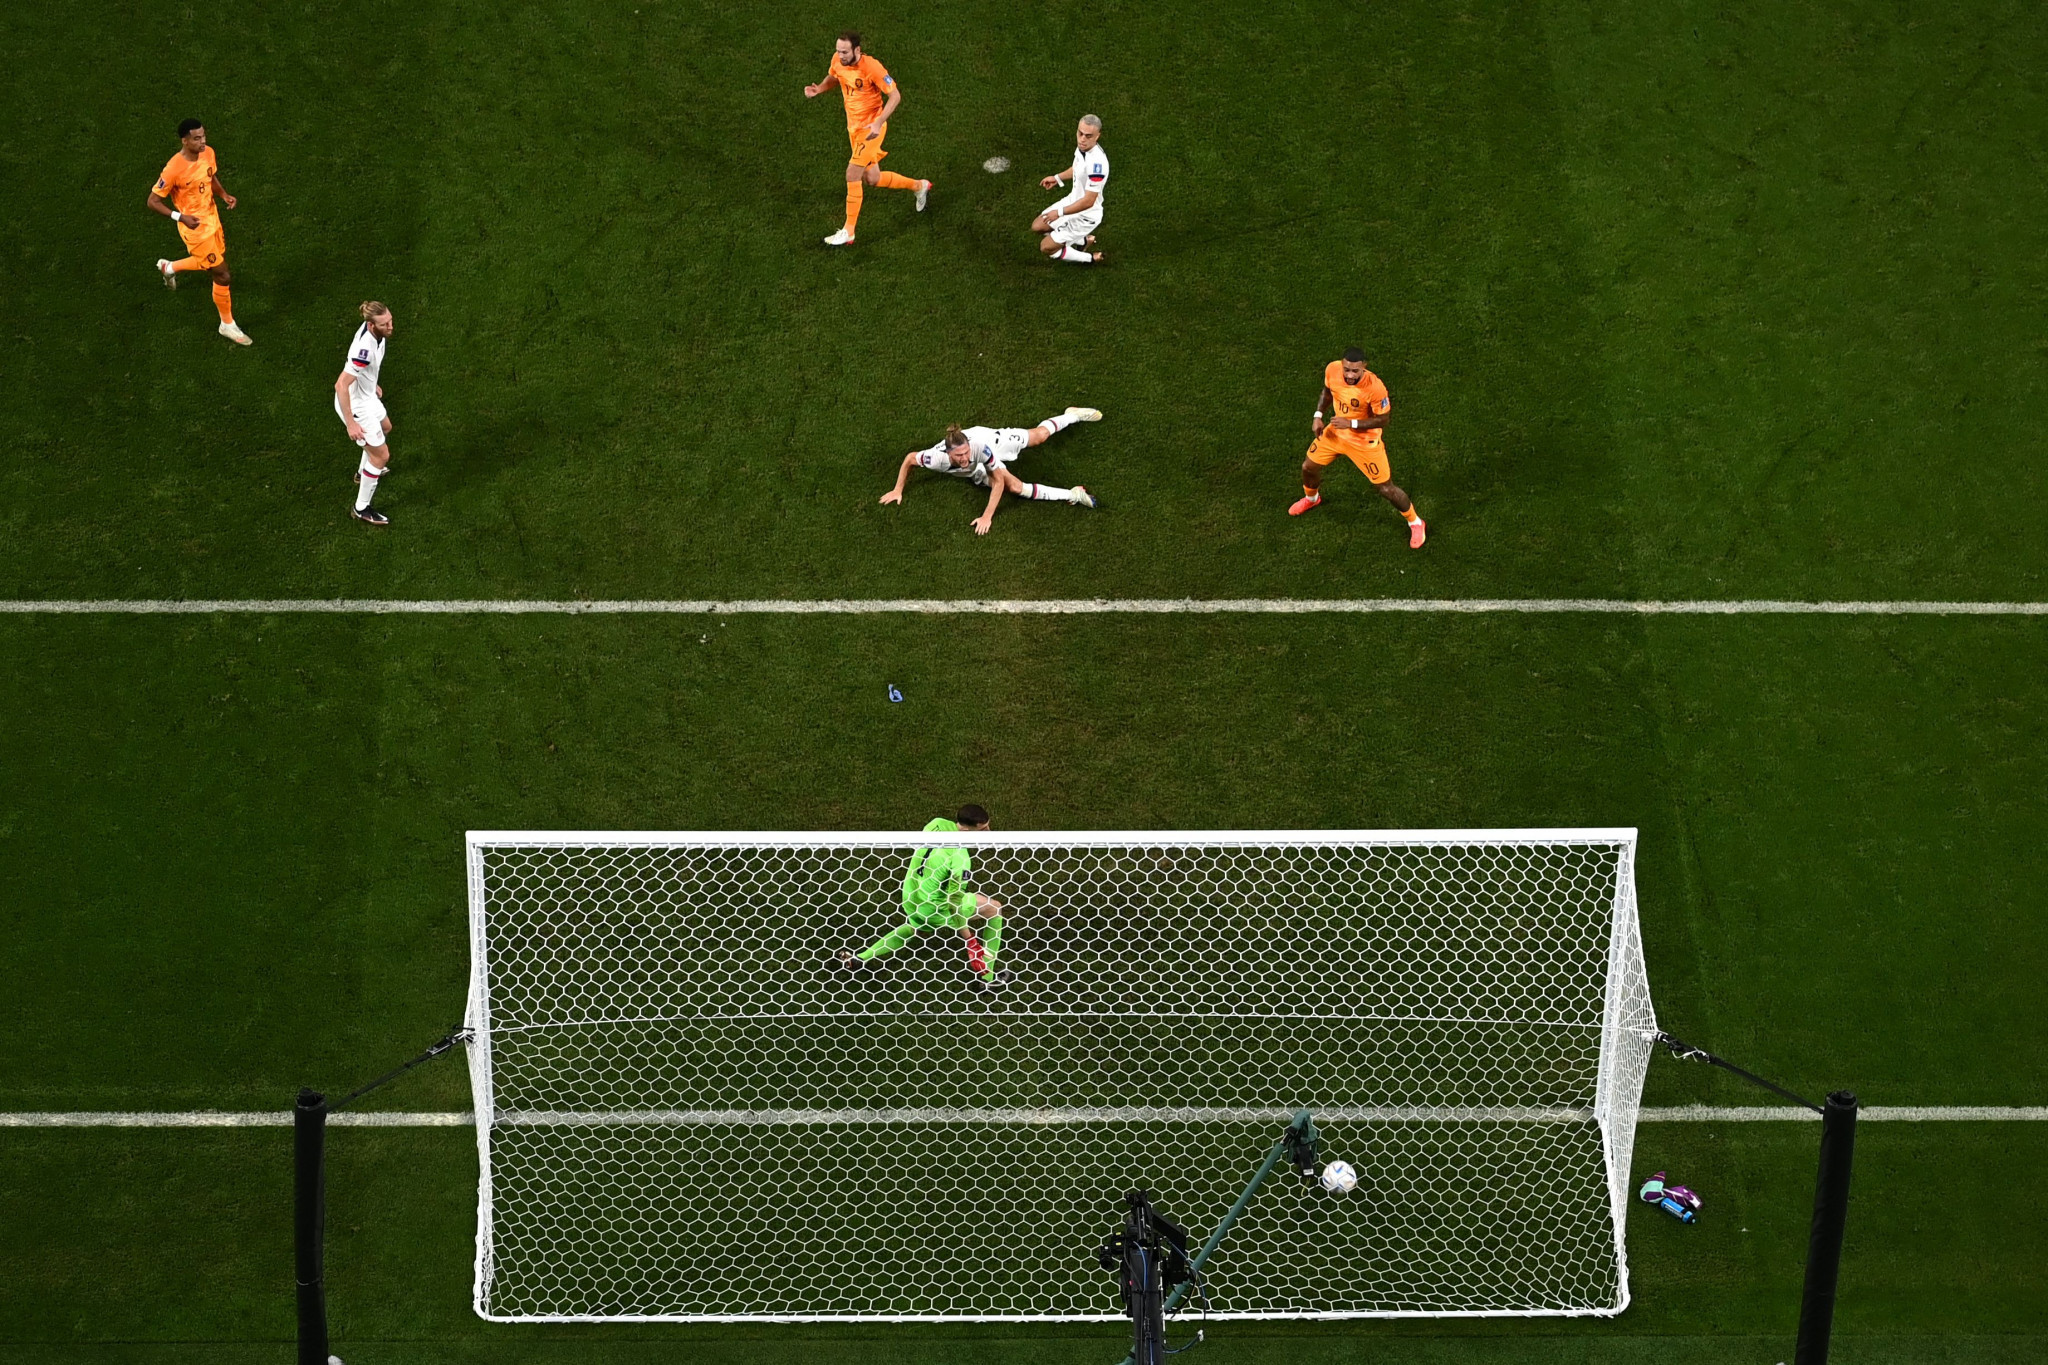 Daley Blind doubled the advantage for the Dutch before half-time ©Getty Images